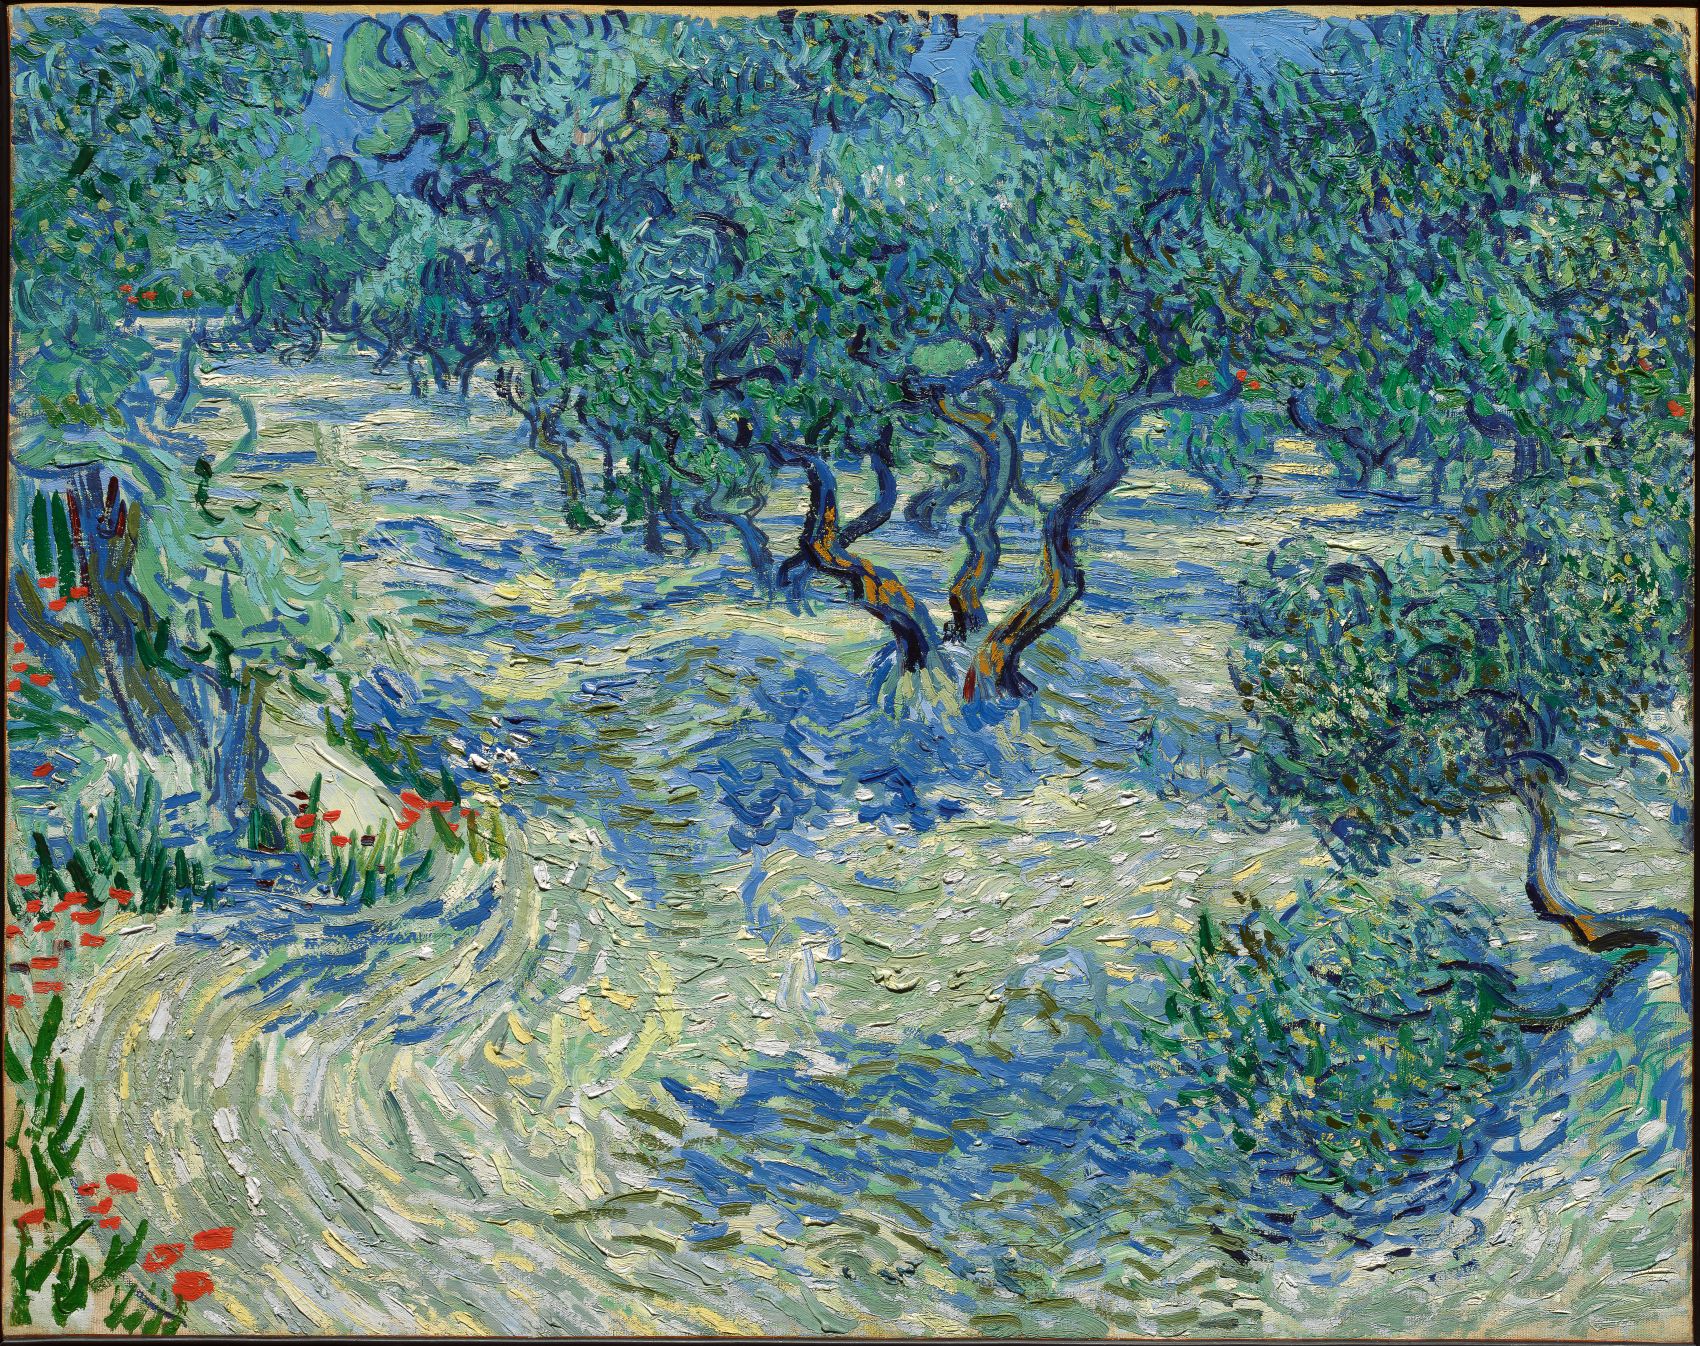 Olive Trees by Vincent van Gogh - 1889 - 73.2 × 92.2 cm Nelson-Atkins Museum of Art